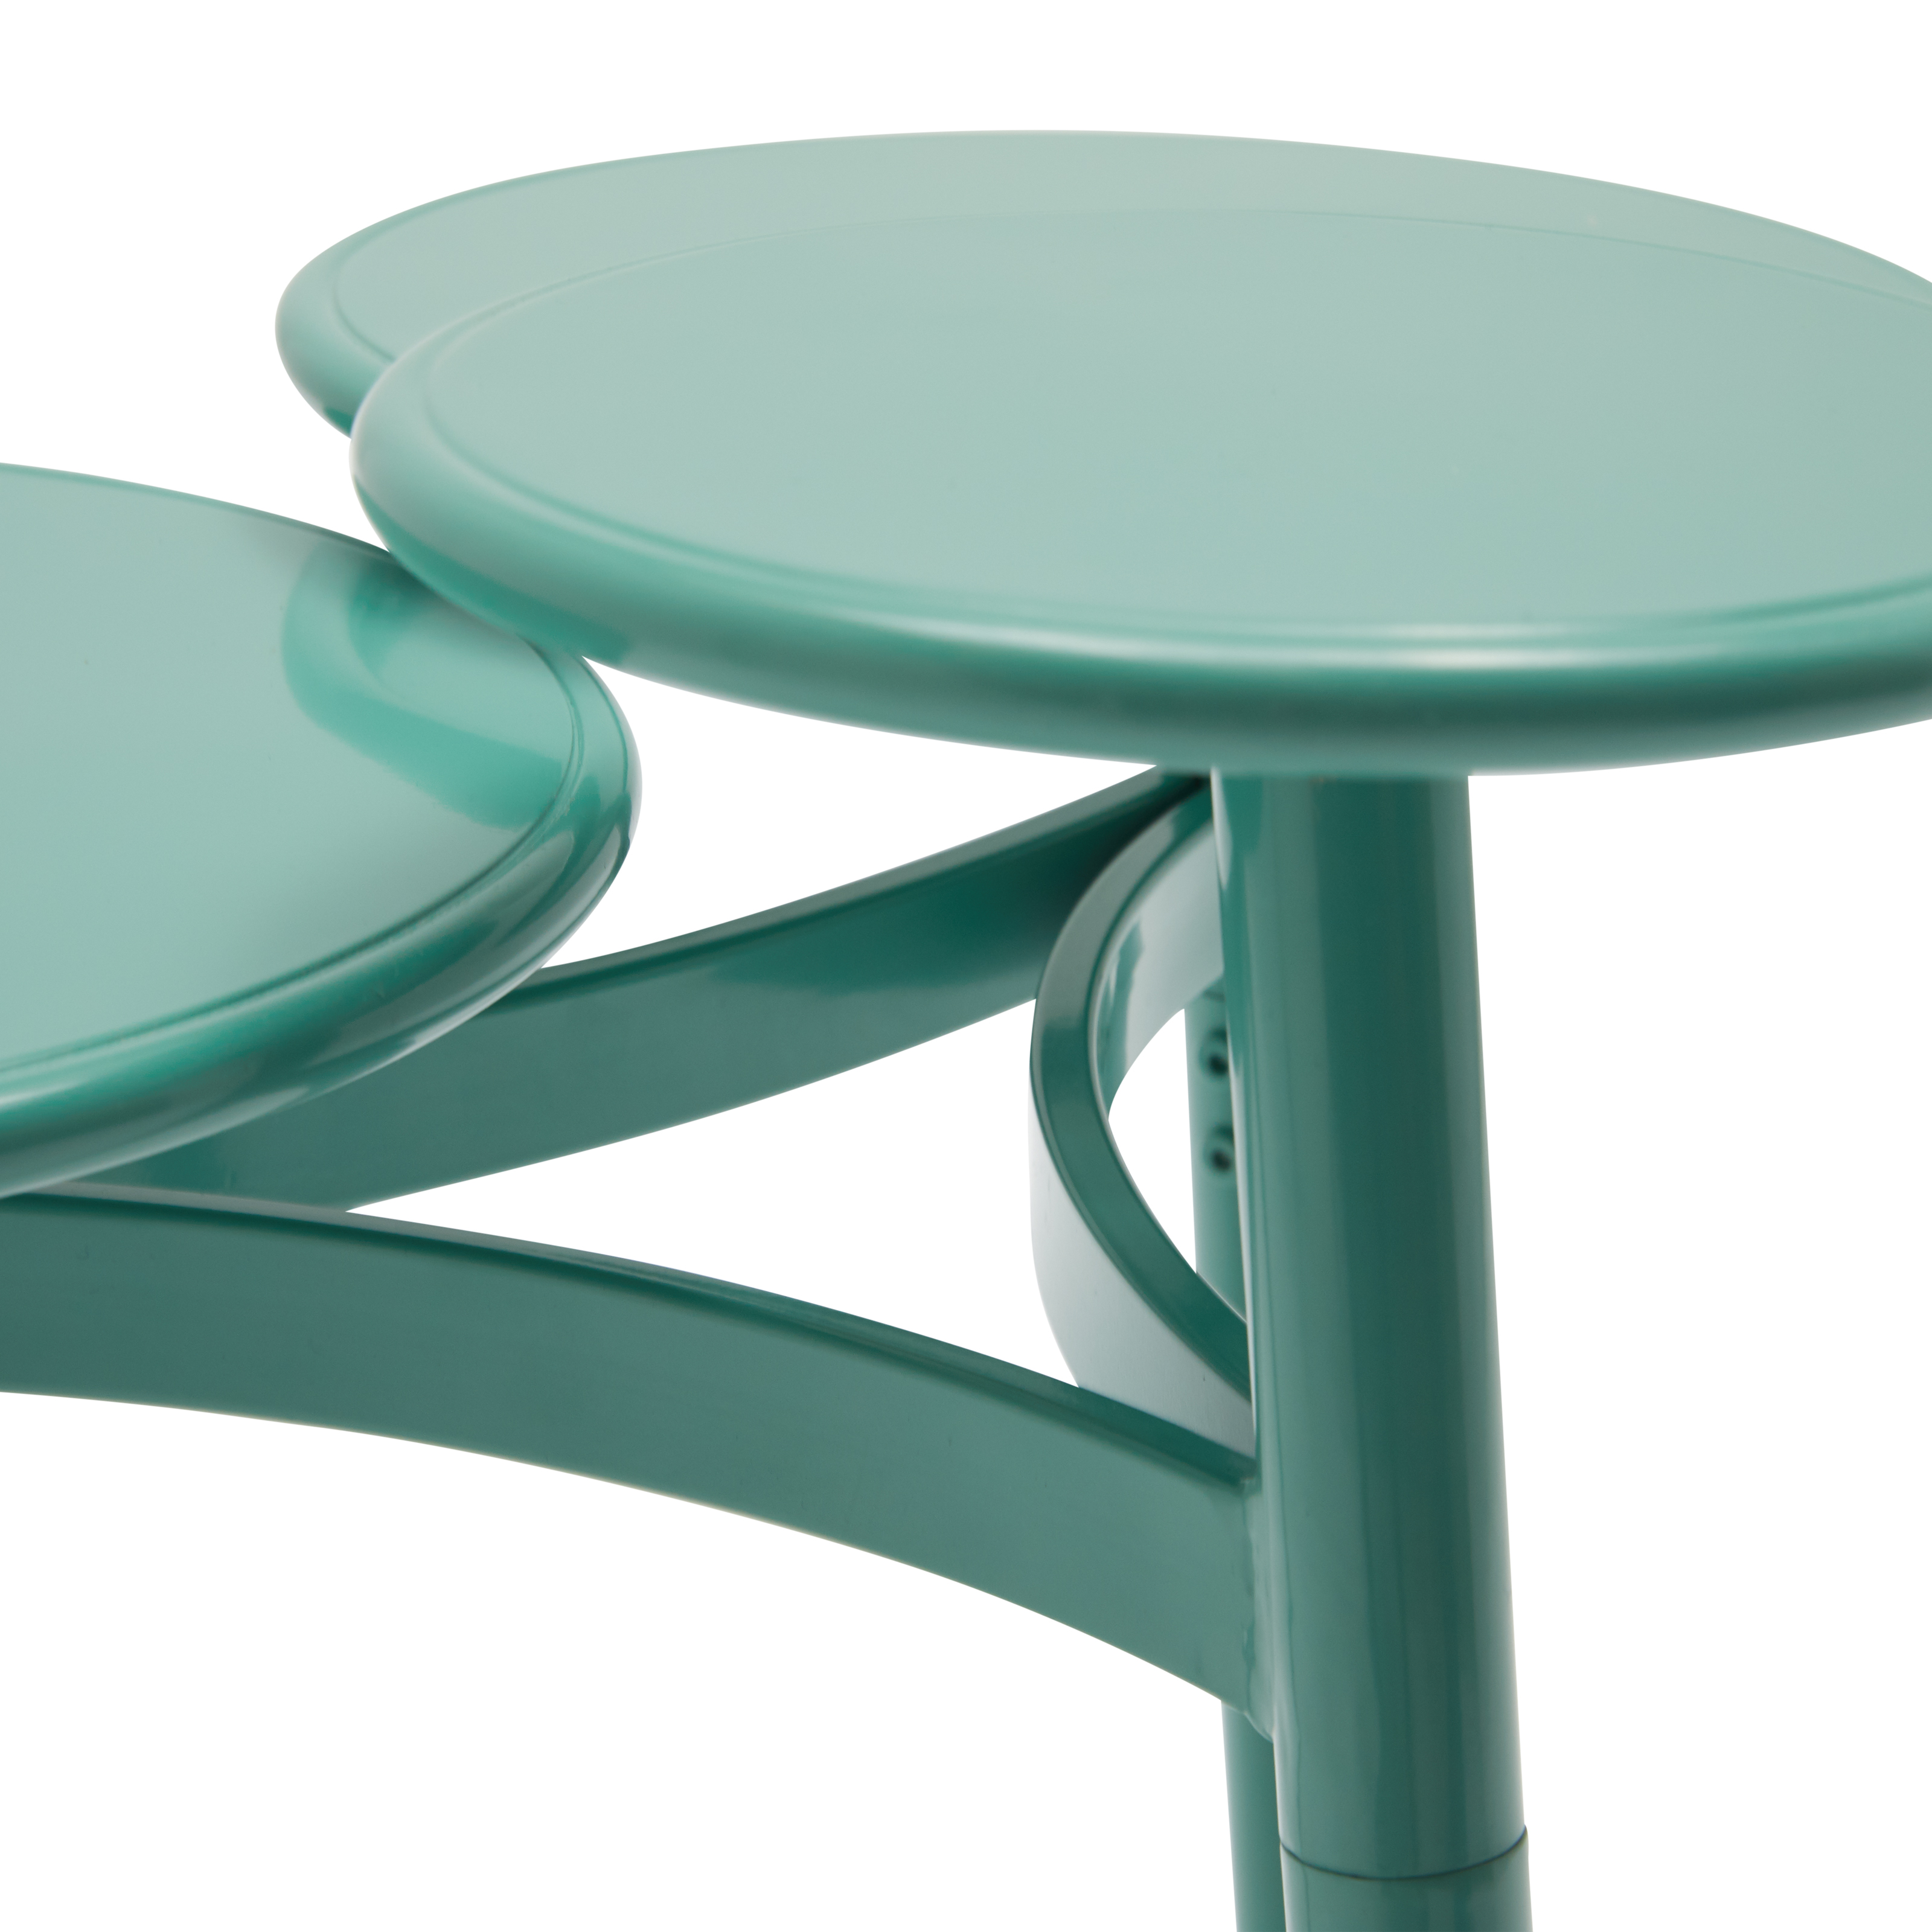 Multi-Tier Metal Accent Table, Multiple Colors by Drew Barrymore Flower Home - image 3 of 14